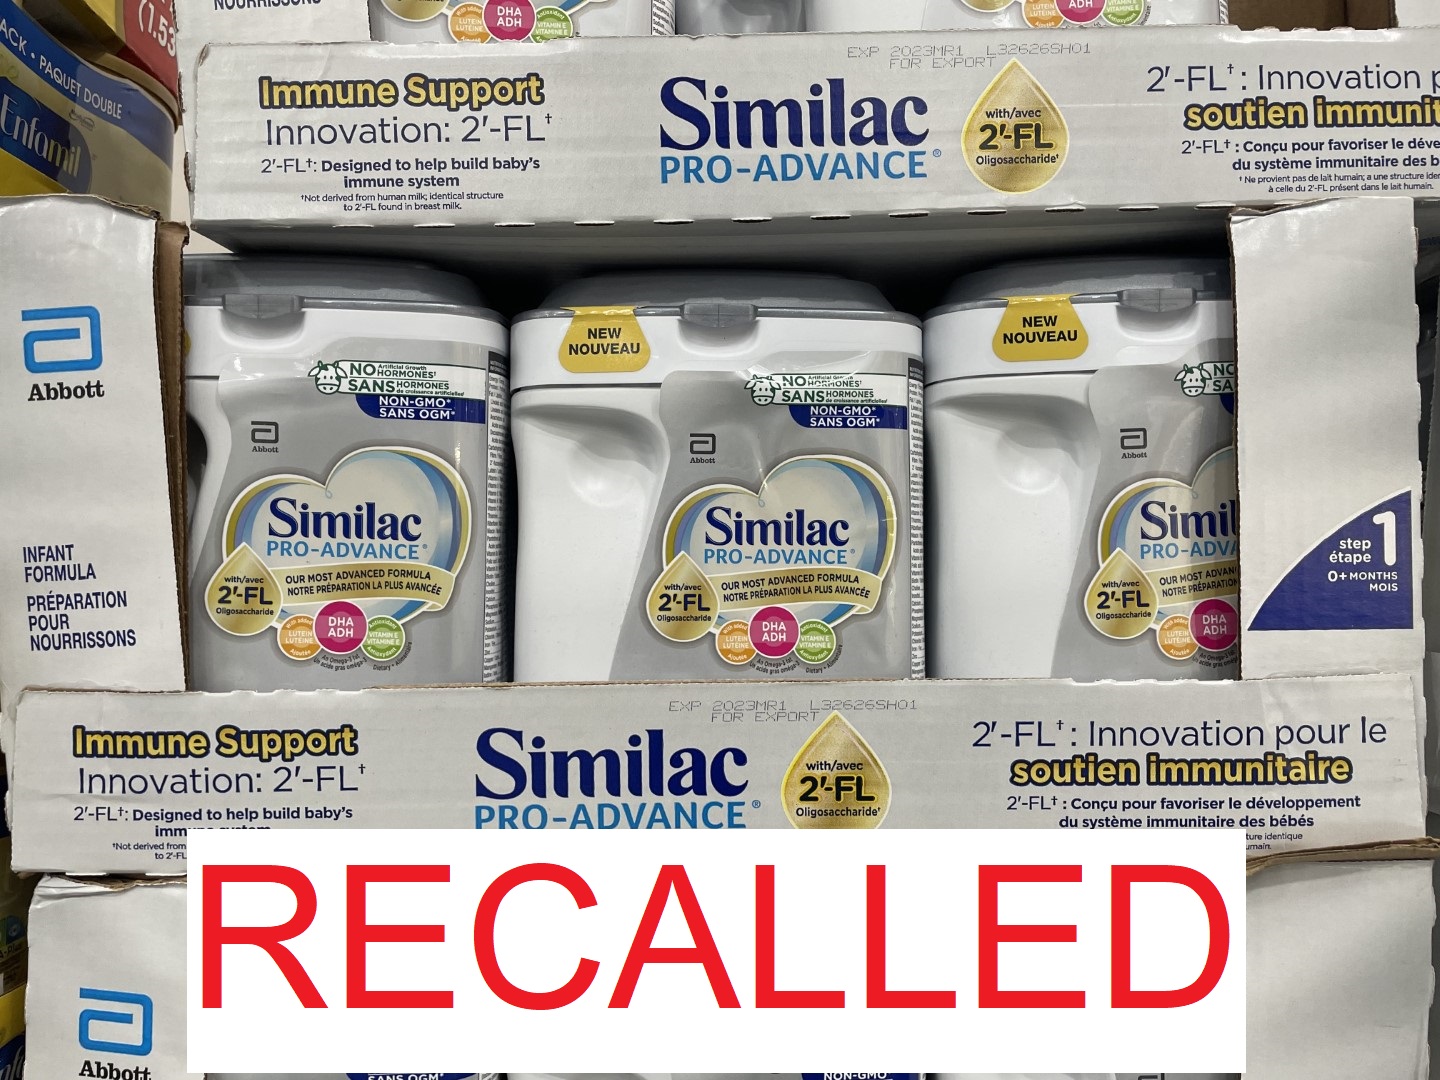 RECALL NOTICE SIMILAC infant formula products recalled due to Salmonella Costco West Fan Blog